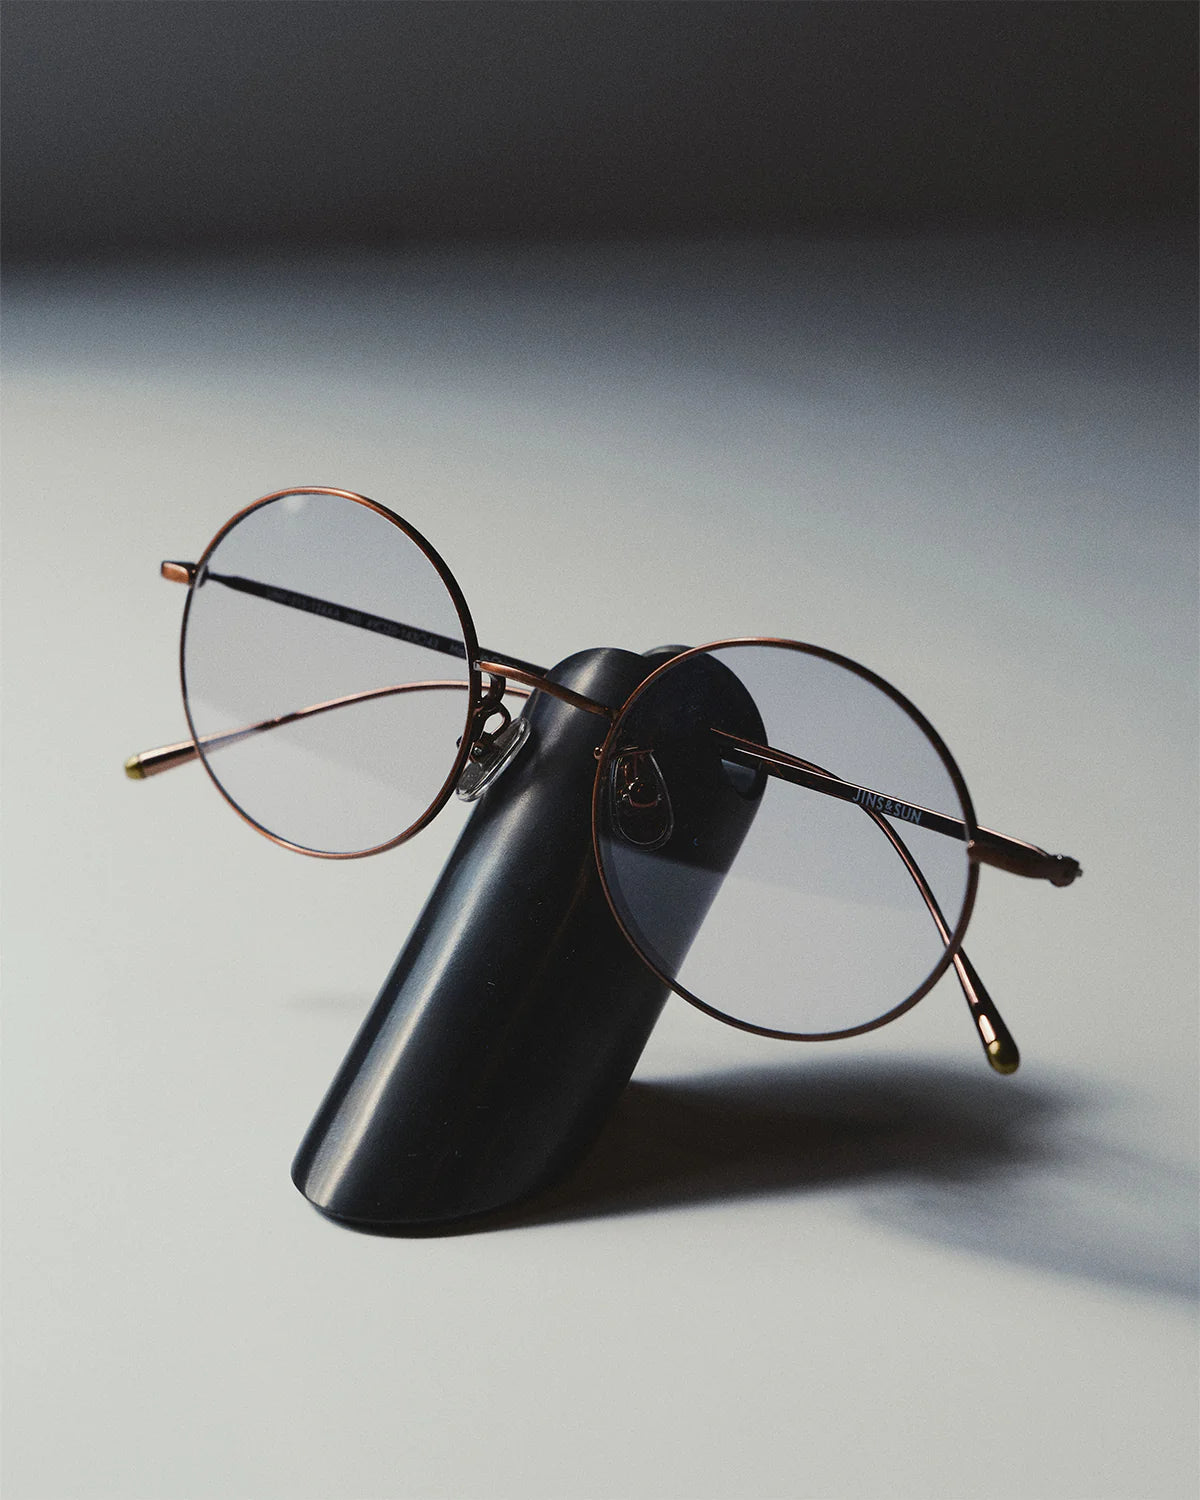 Eyewear Stand by Craighill